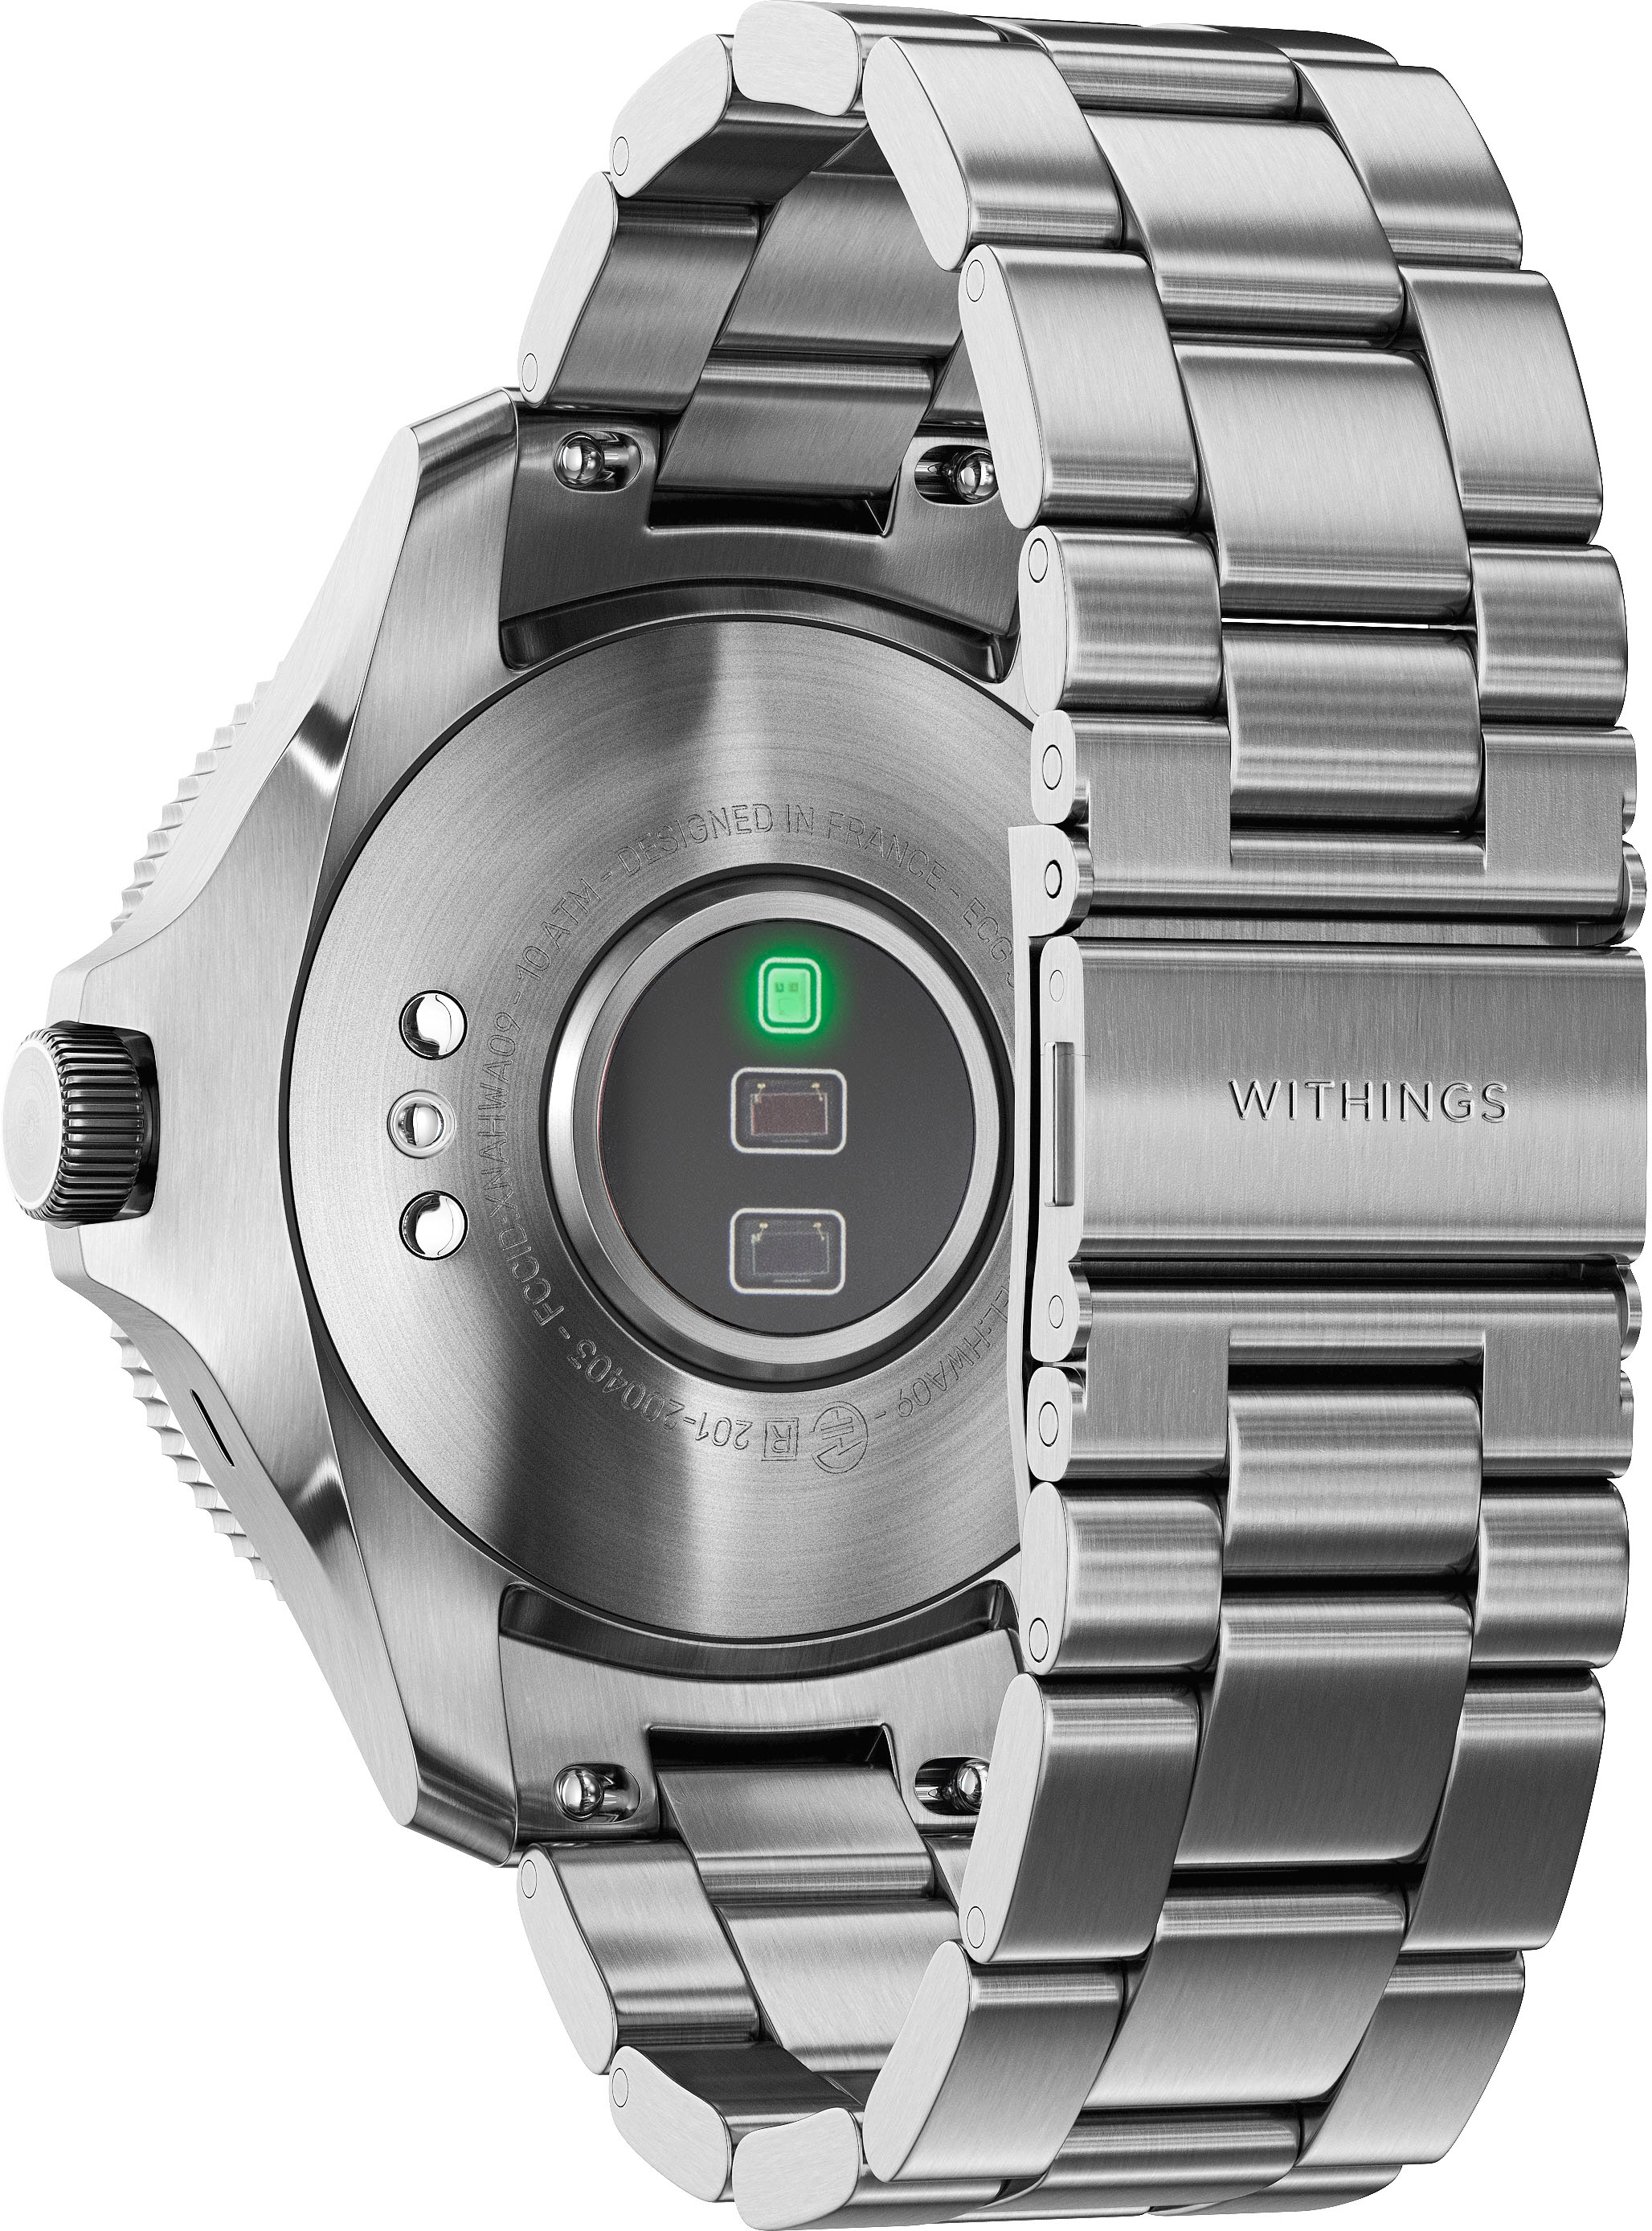 Withings Scanwatch Horizon Smartwatch looks like a luxury diver's watch